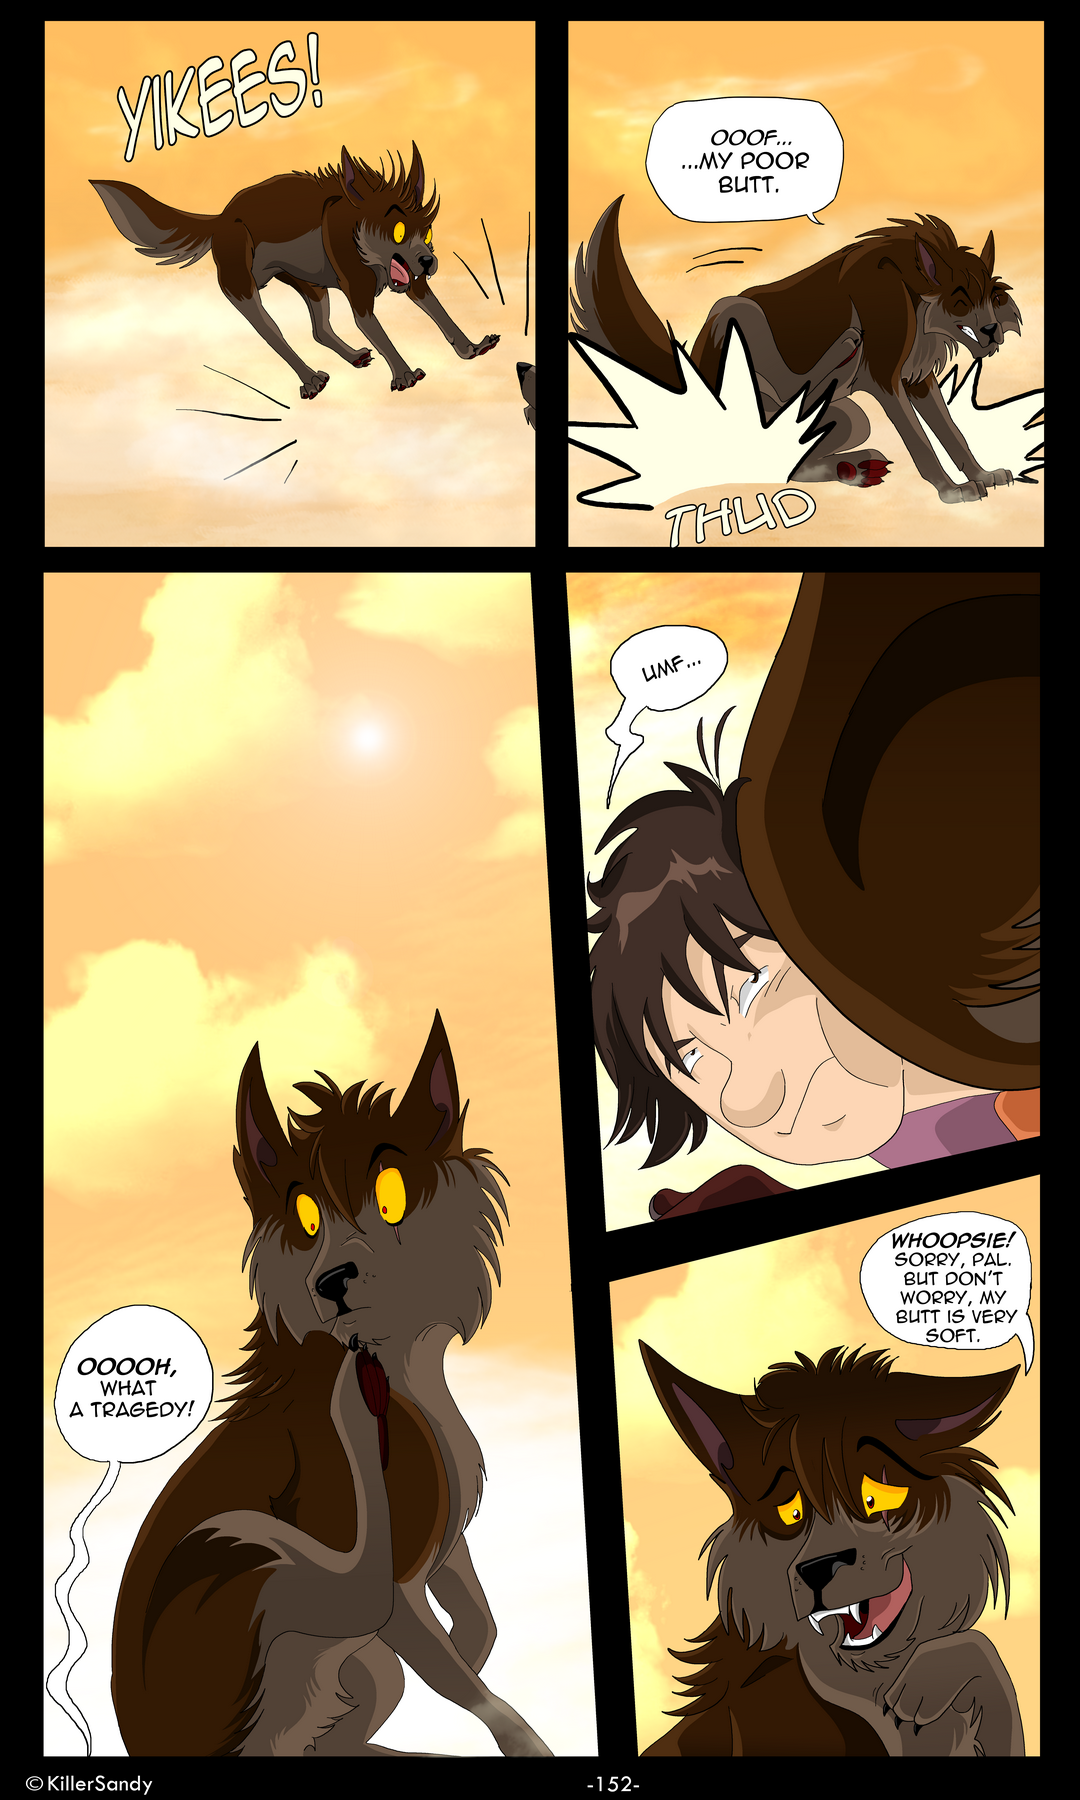 The Prince of the Moonlight Stone page 152